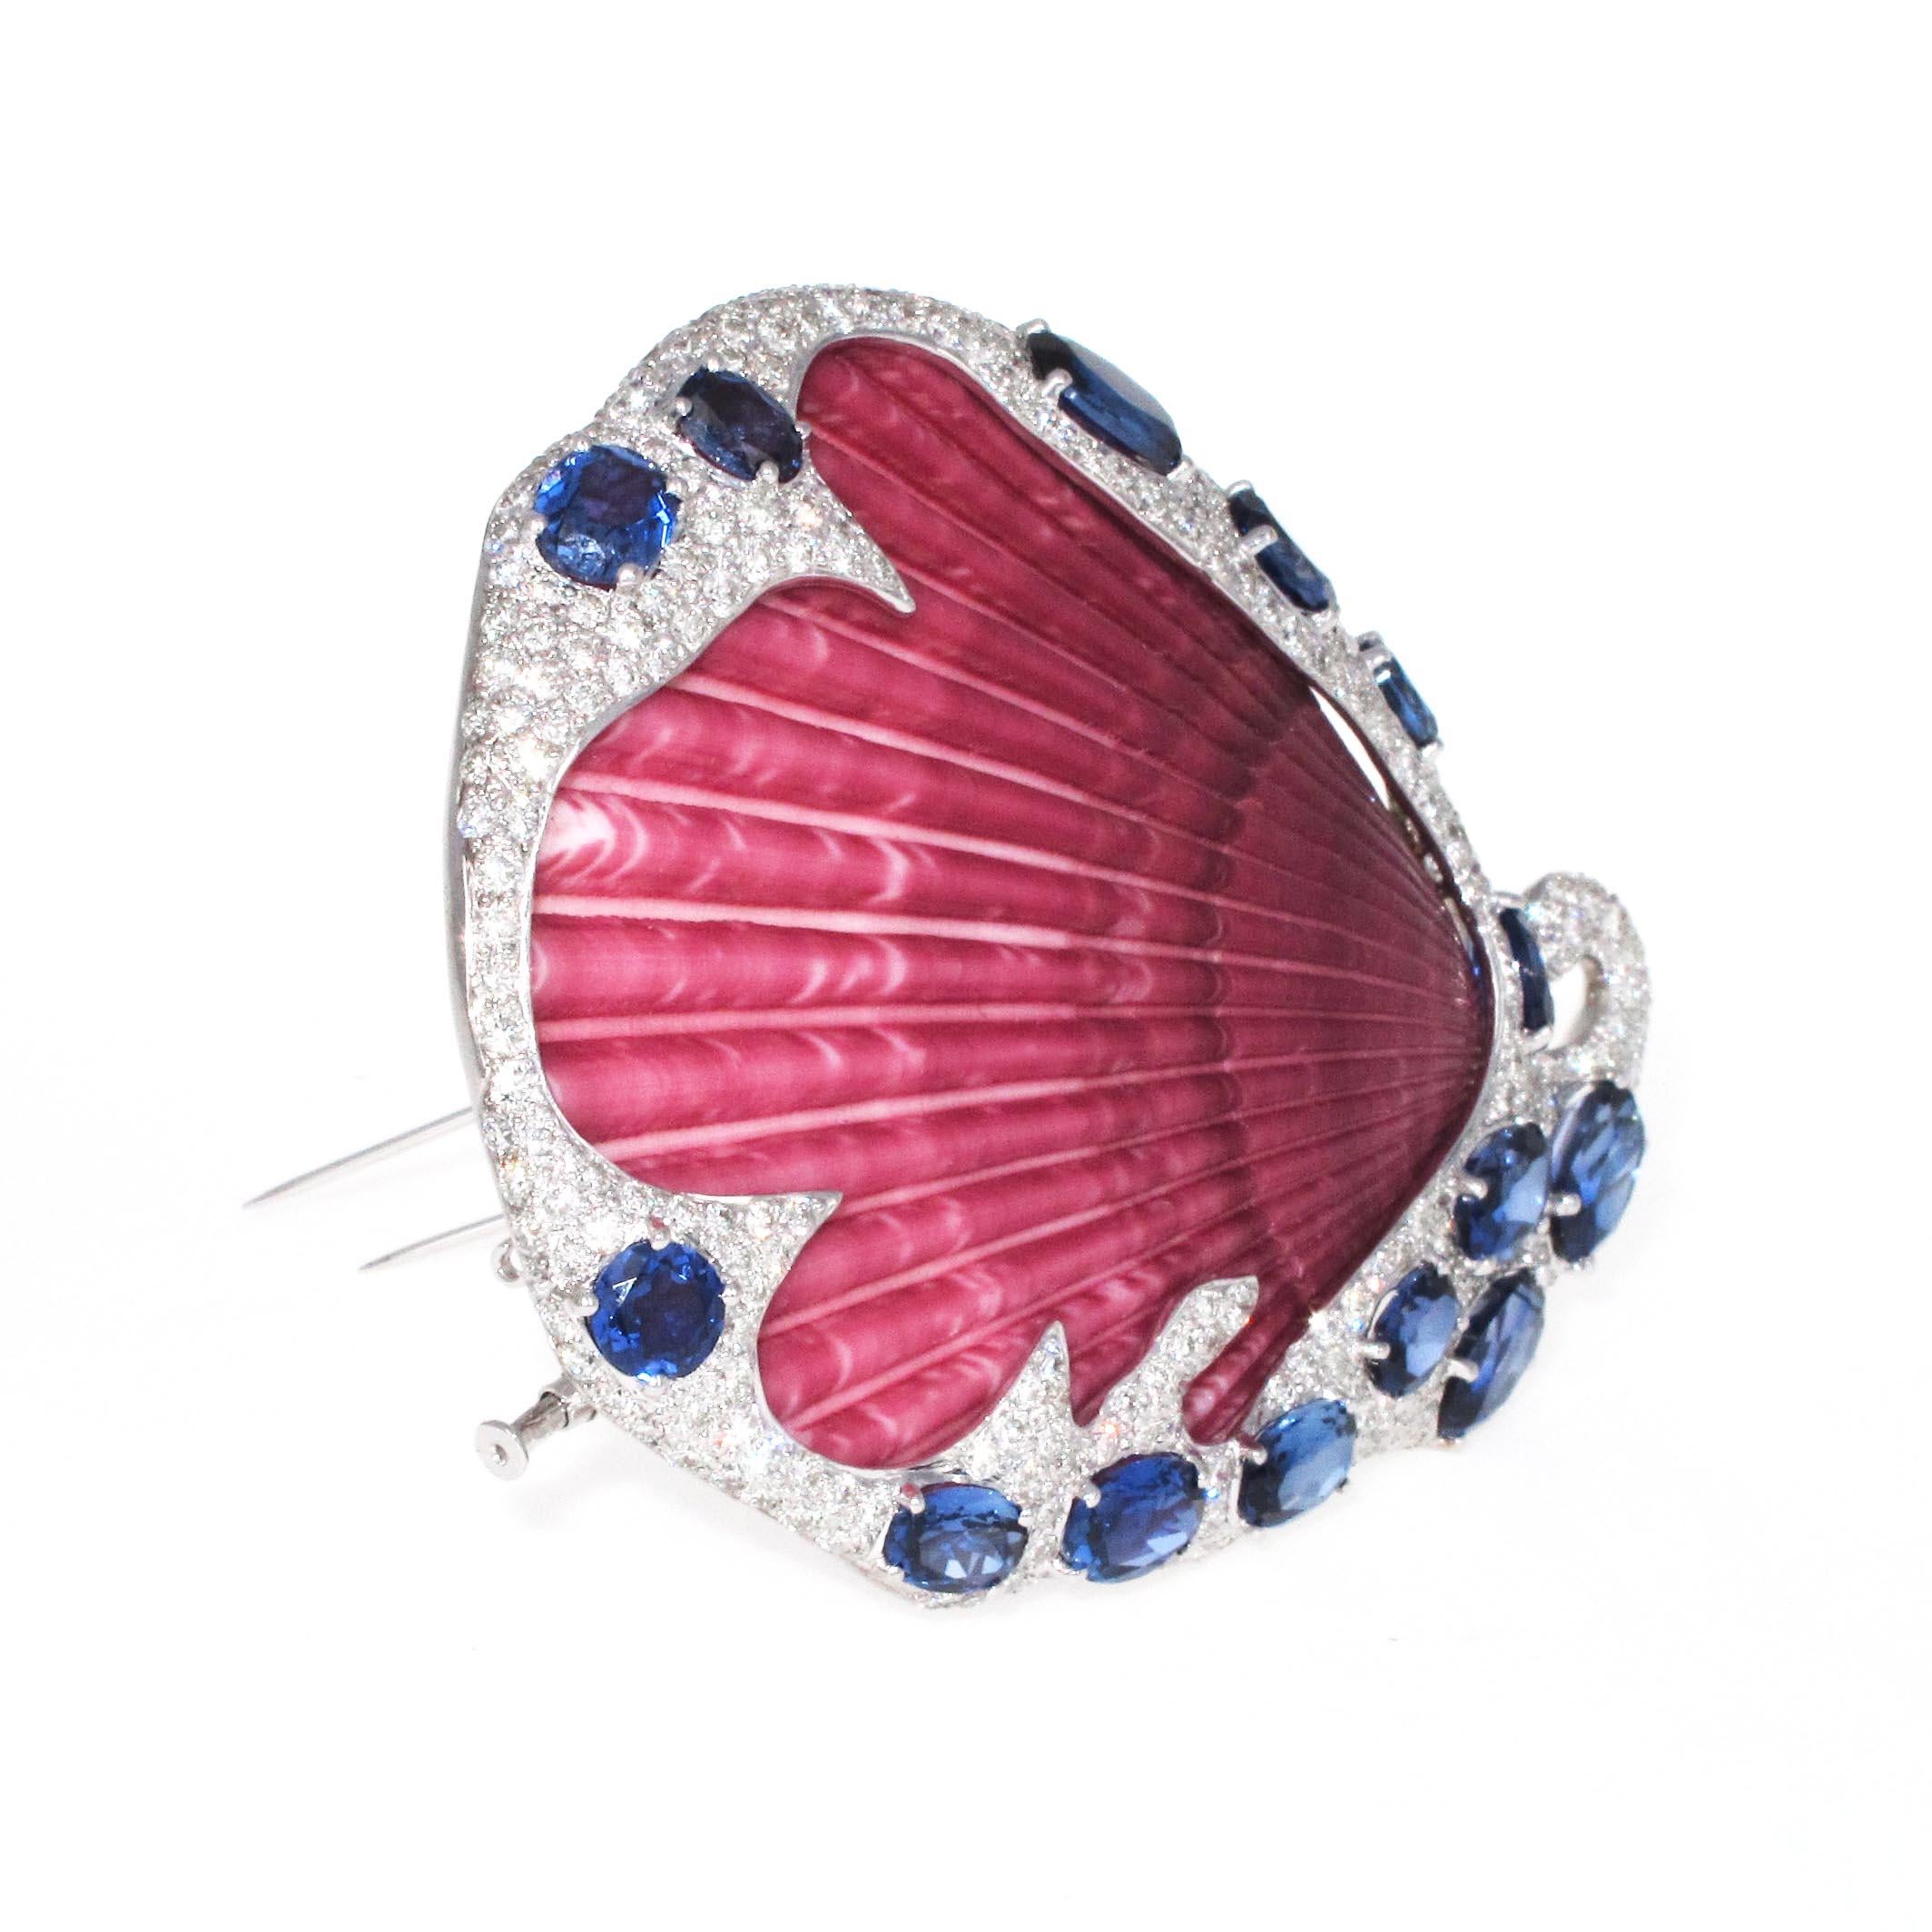 Such a special unique piece. This brooch has a gorgeous pink shell set in the center of it. Around the shell is 8.08 carats of high color and clarity white diamonds. We estimate them to be E/F in color and VS/Si in clarity. The larger stones are